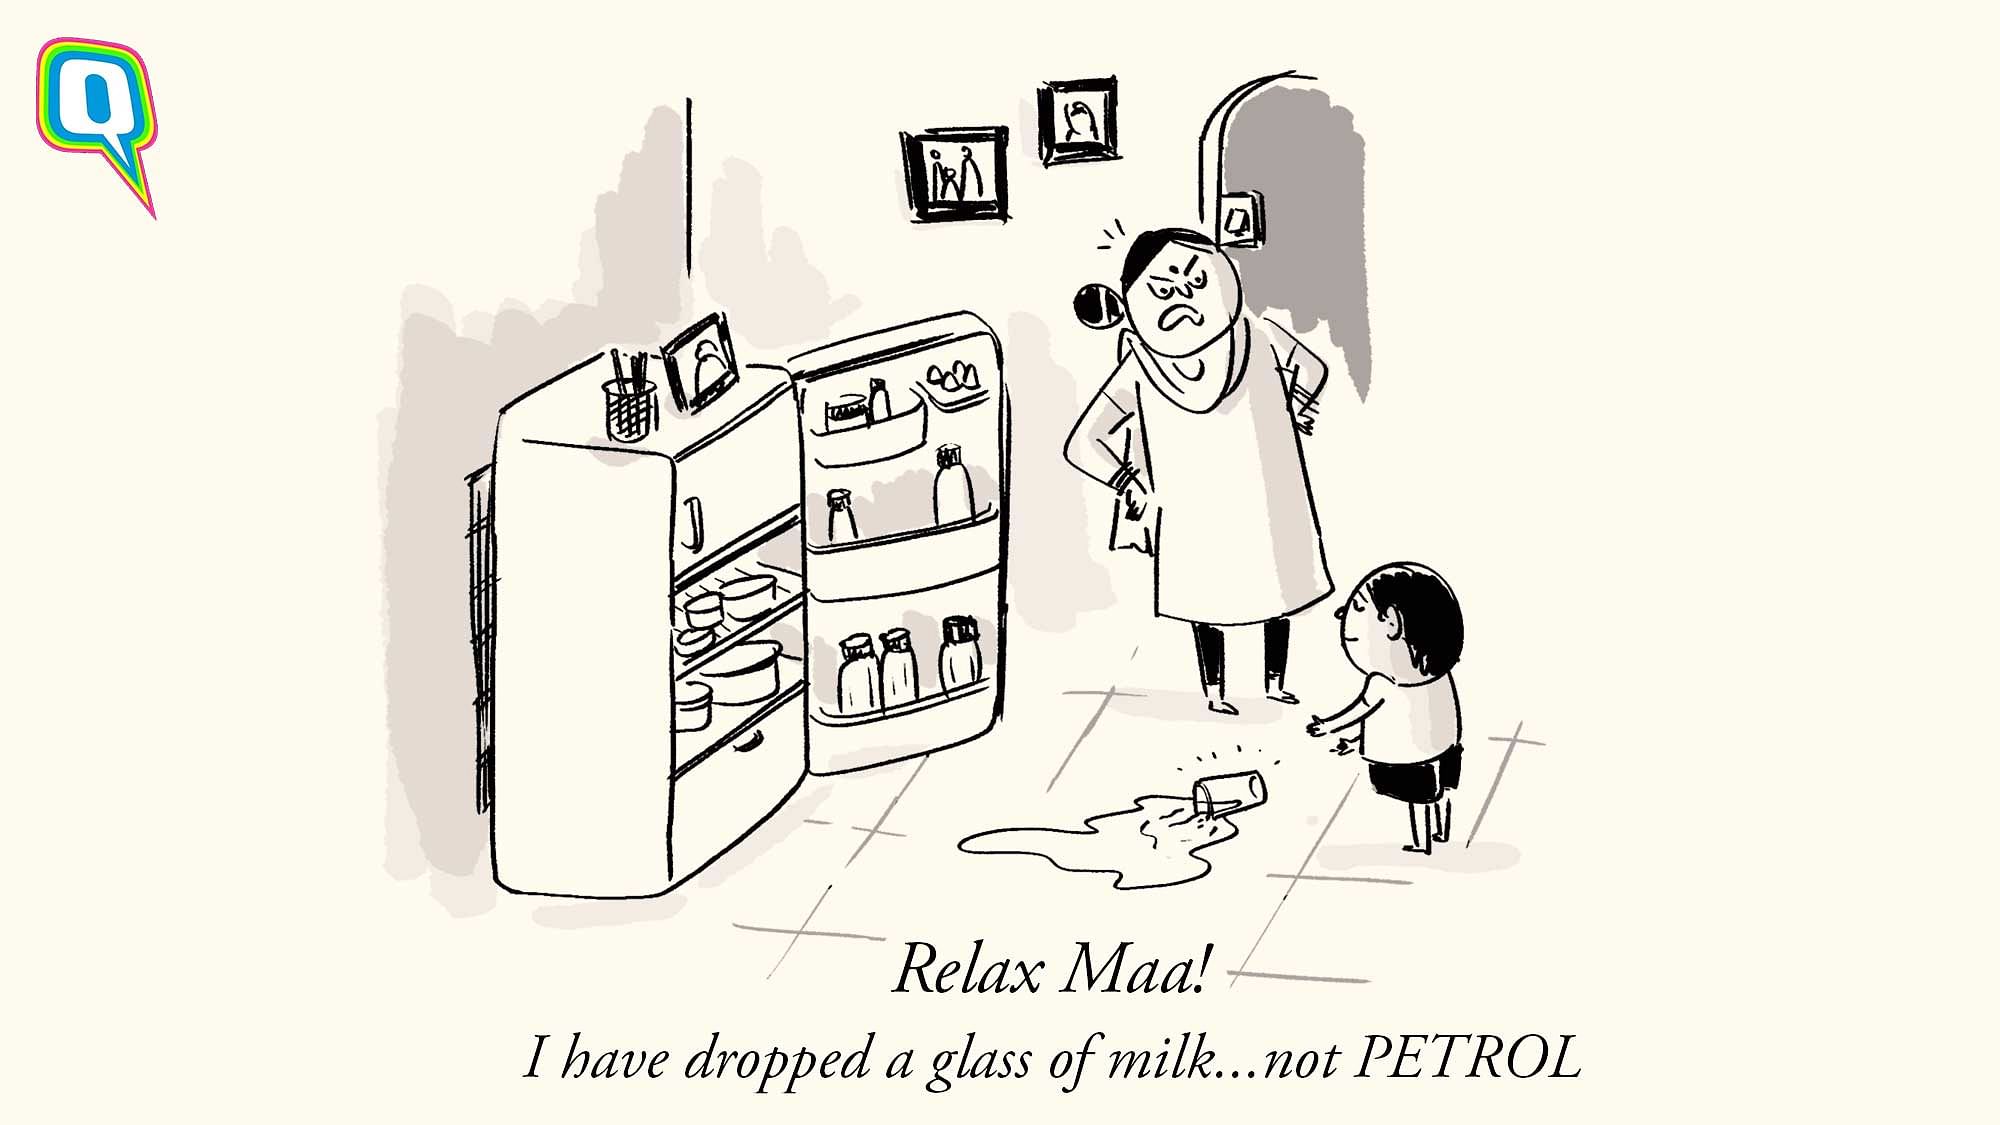 Maybe it’s a good thing that your child is speaking up about rising petrol prices. Even if it’s over spilt milk.